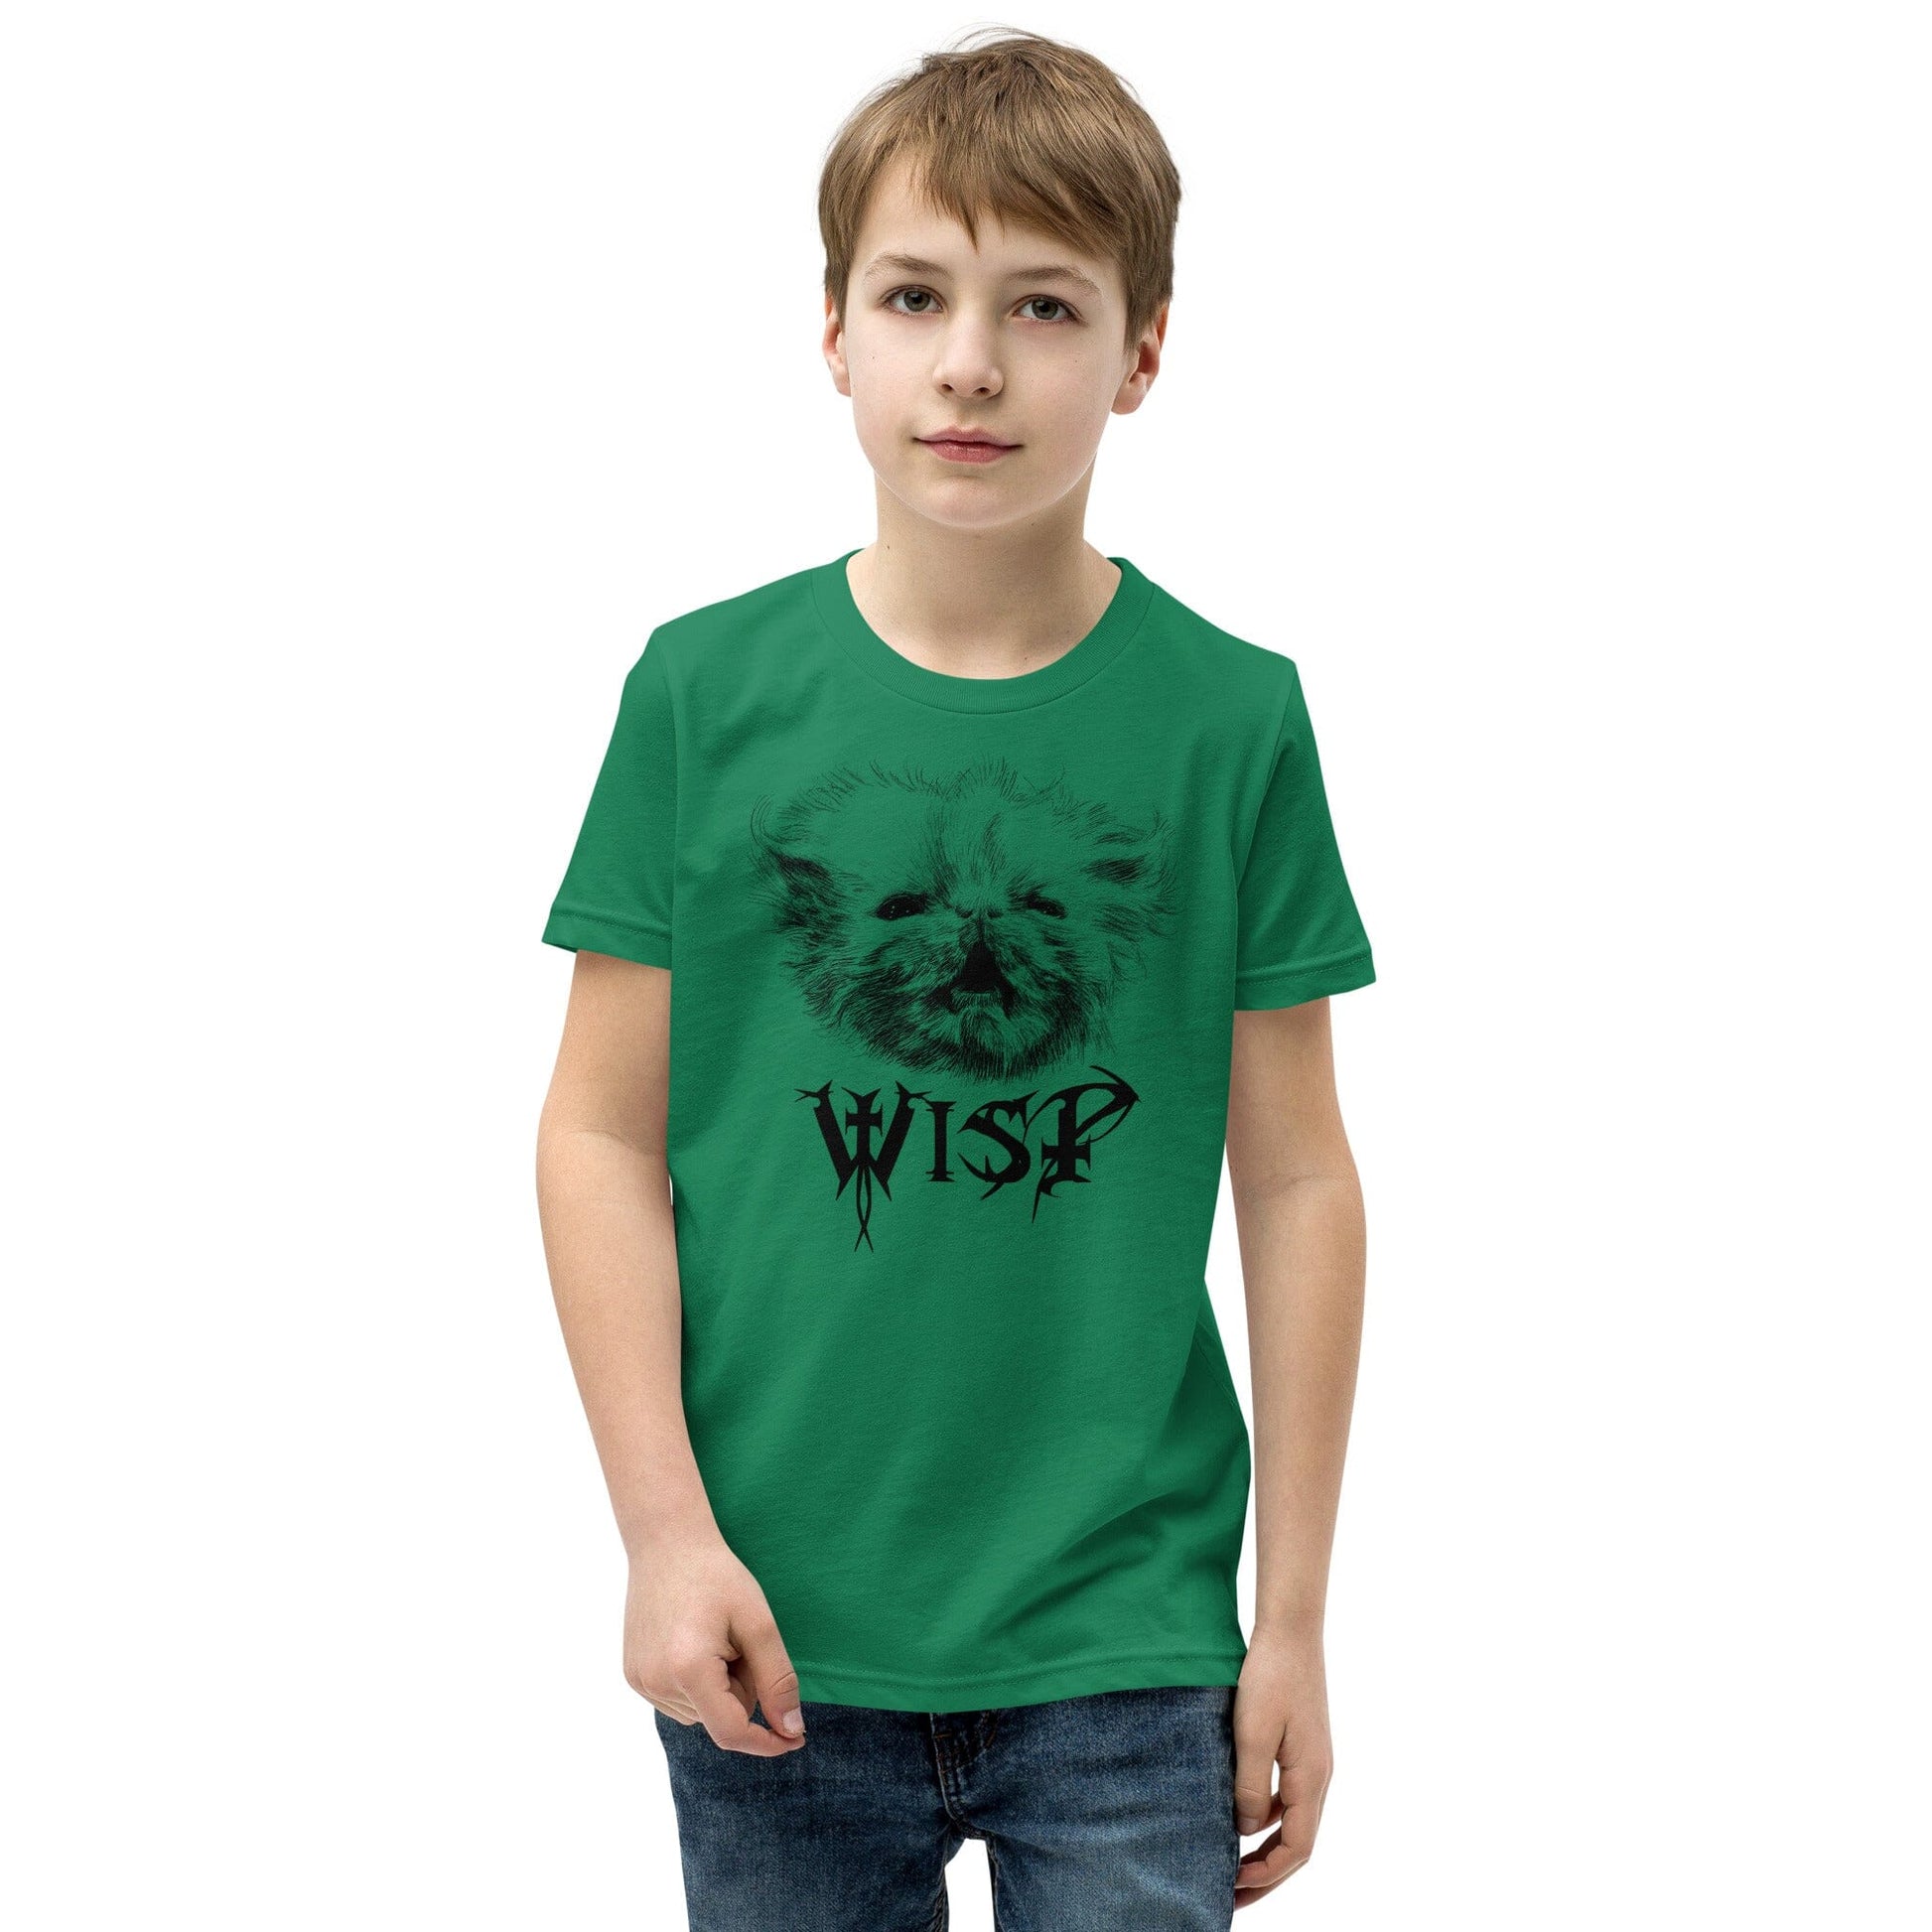 Metal Wisp YOUTH T-Shirt [Unfoiled] (All net proceeds go to Rags to Riches Animal Rescue) JoyousJoyfulJoyness Kelly S 